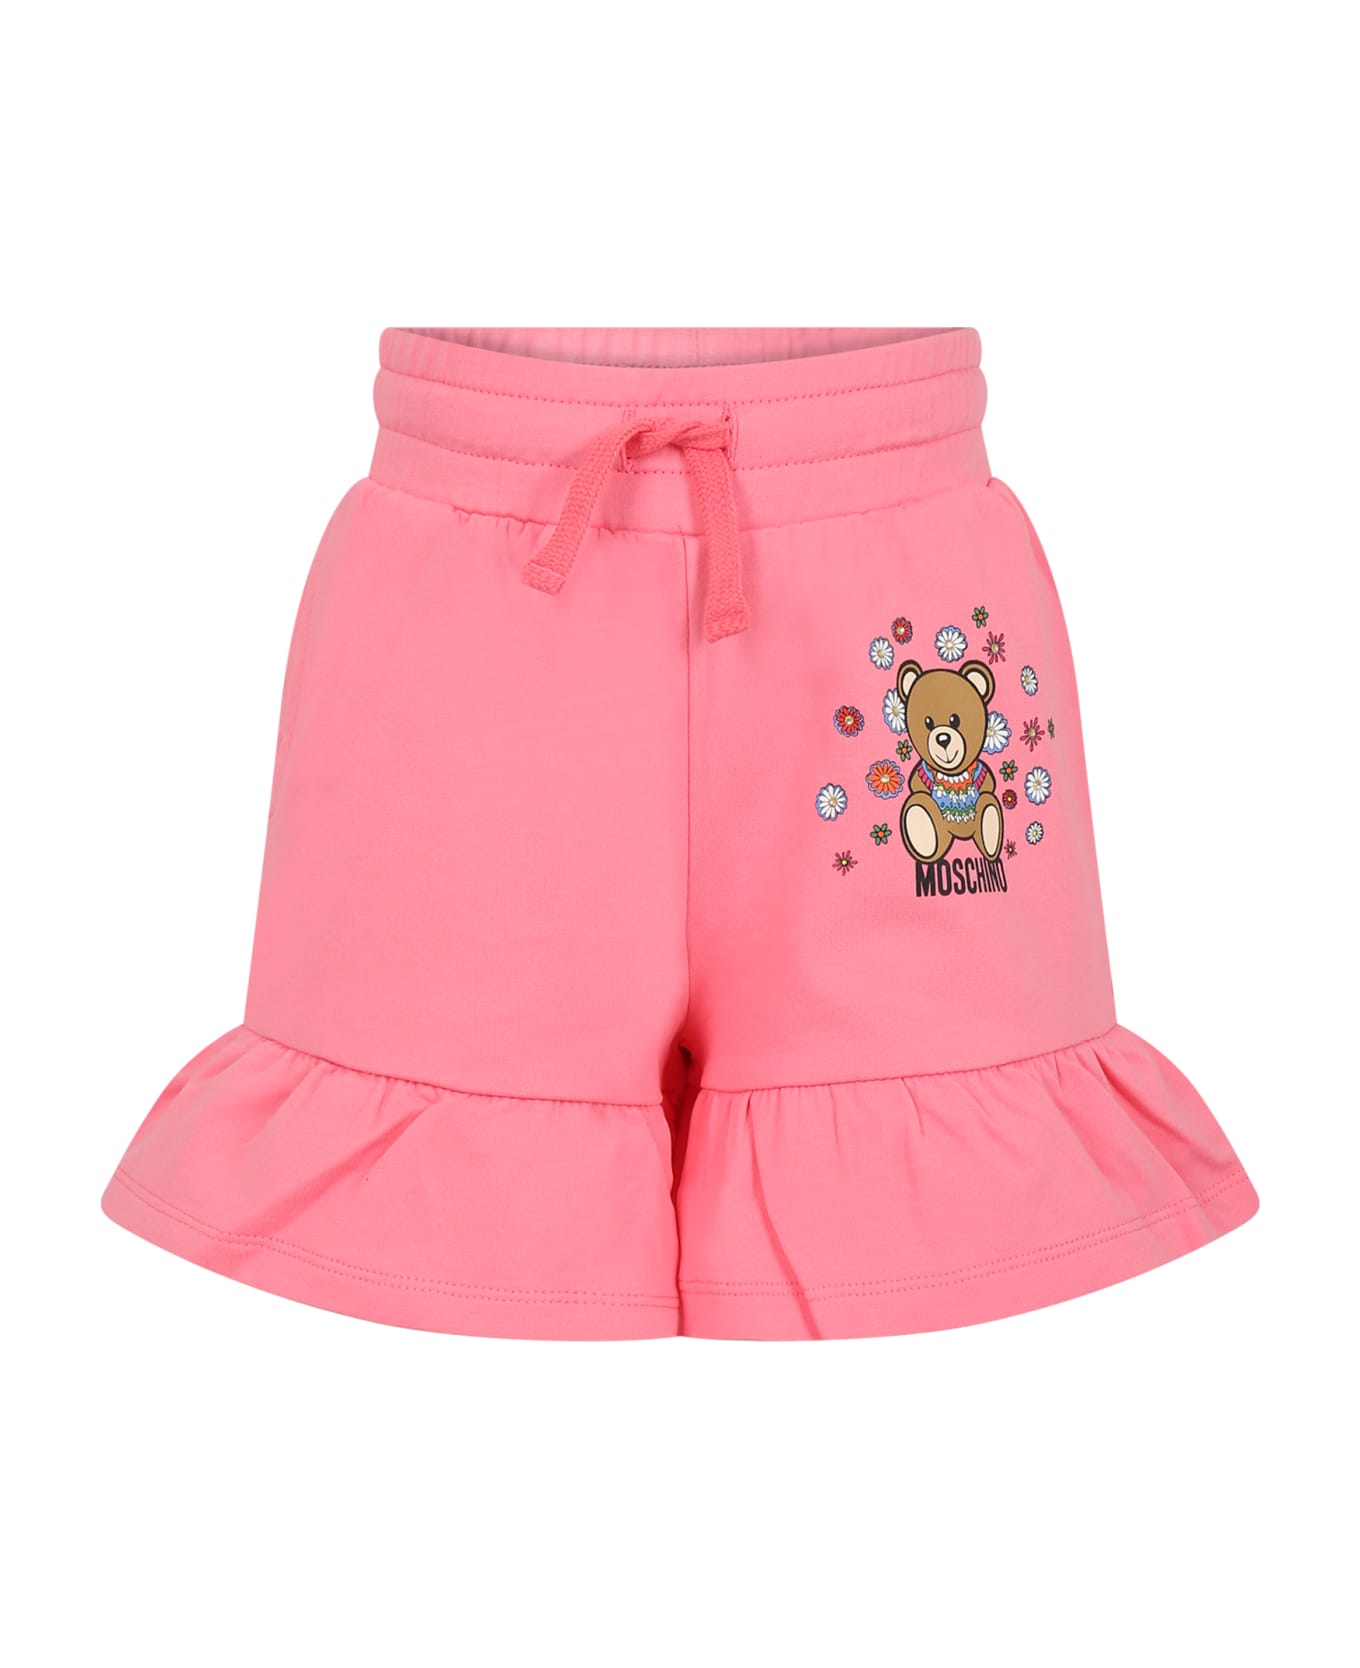 Moschino Pink Shorts For Gilr With Teddy Bera And Flowers - Light Blue